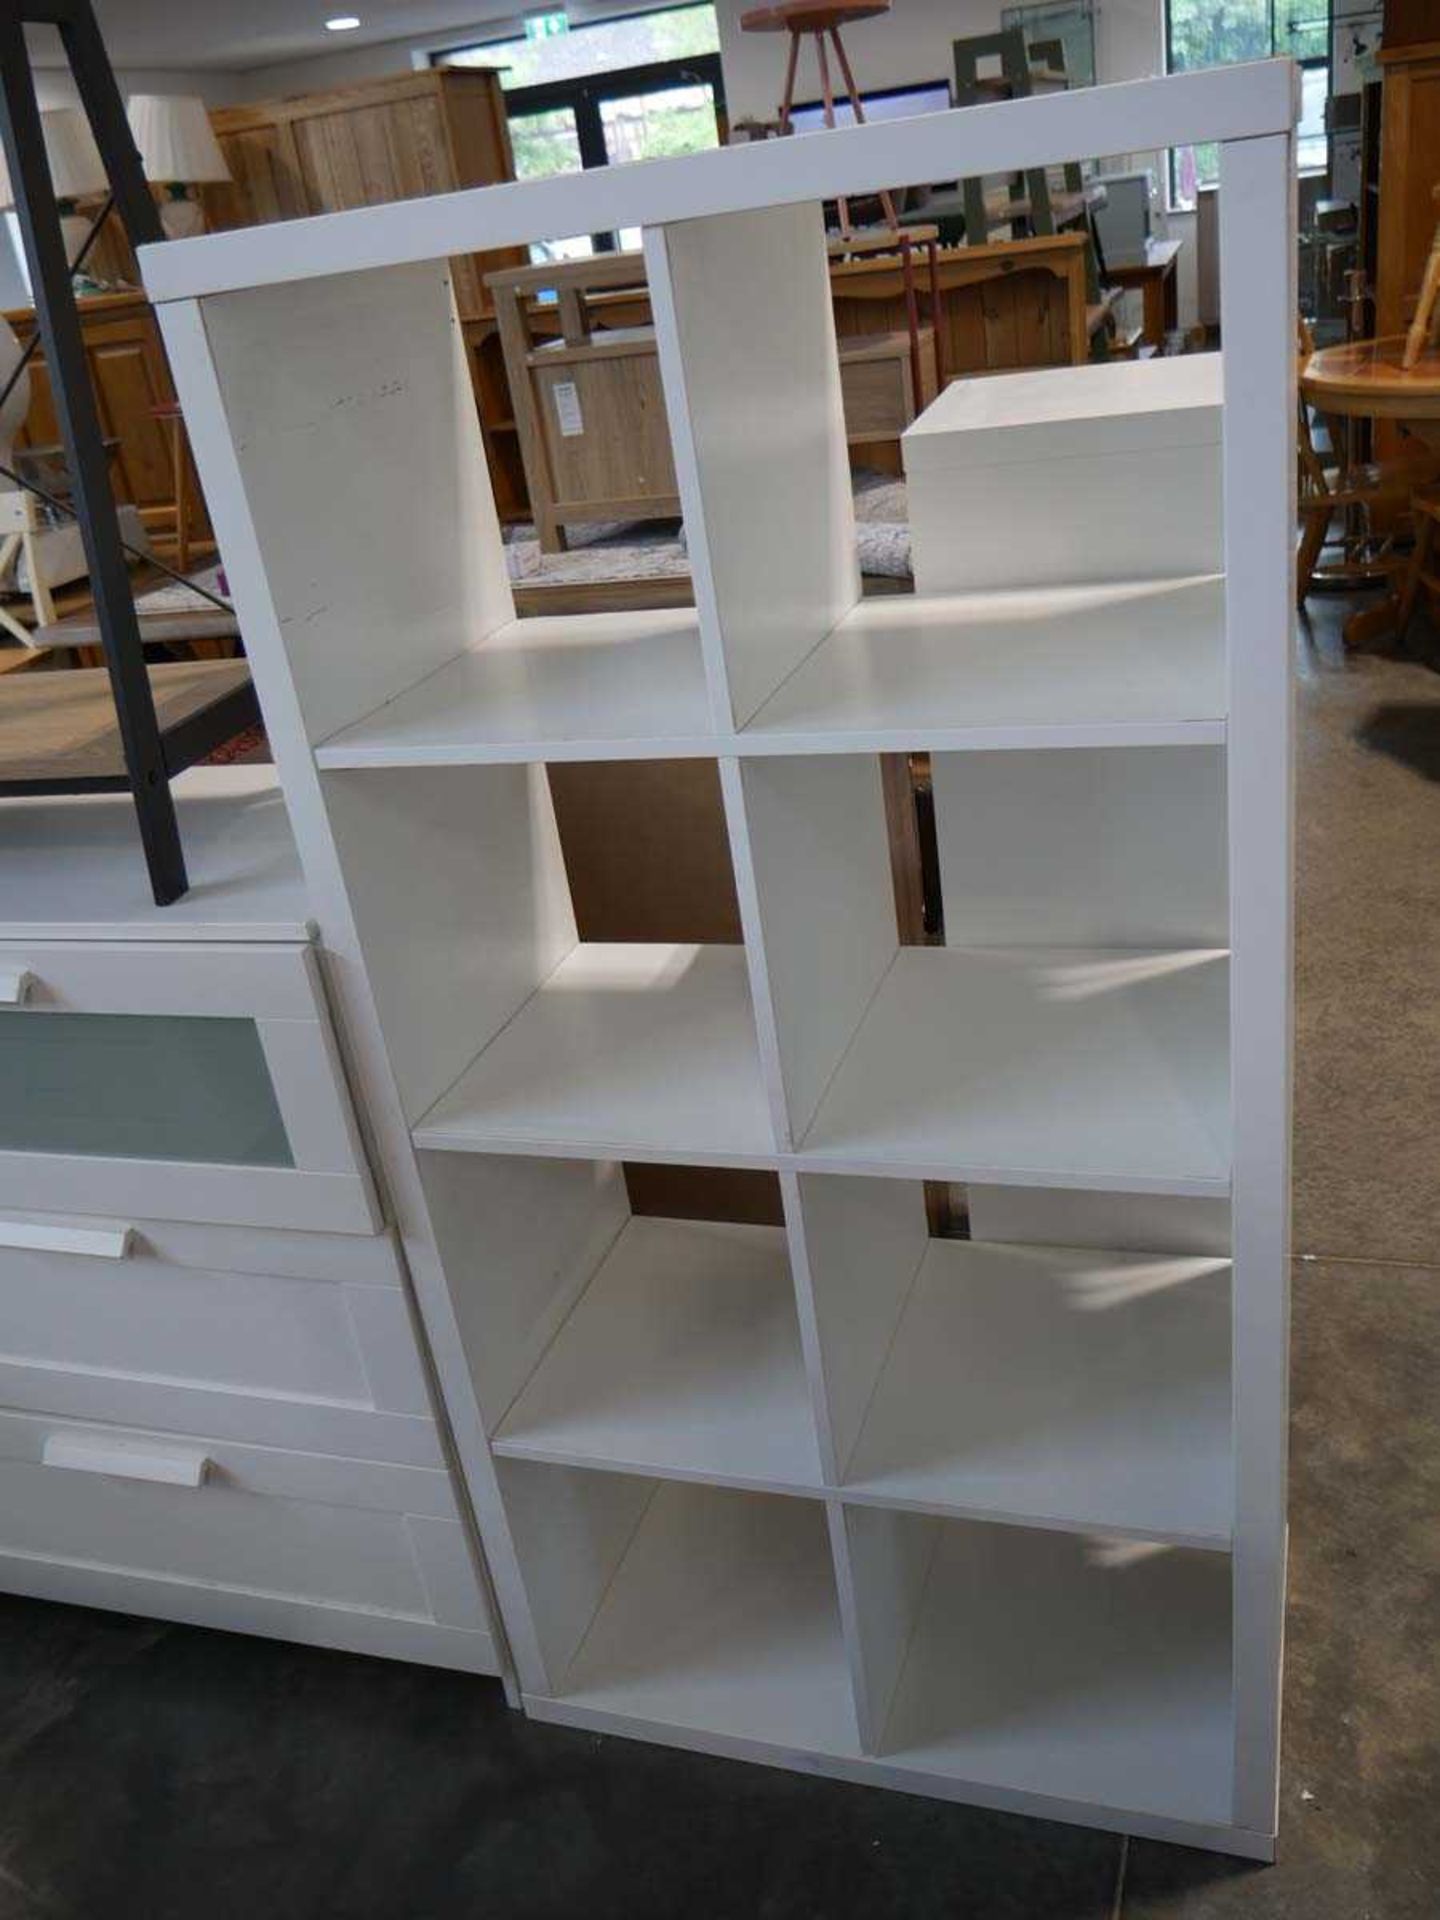 Small white shelving unit together with a white kallax style shelving unit - Image 2 of 2